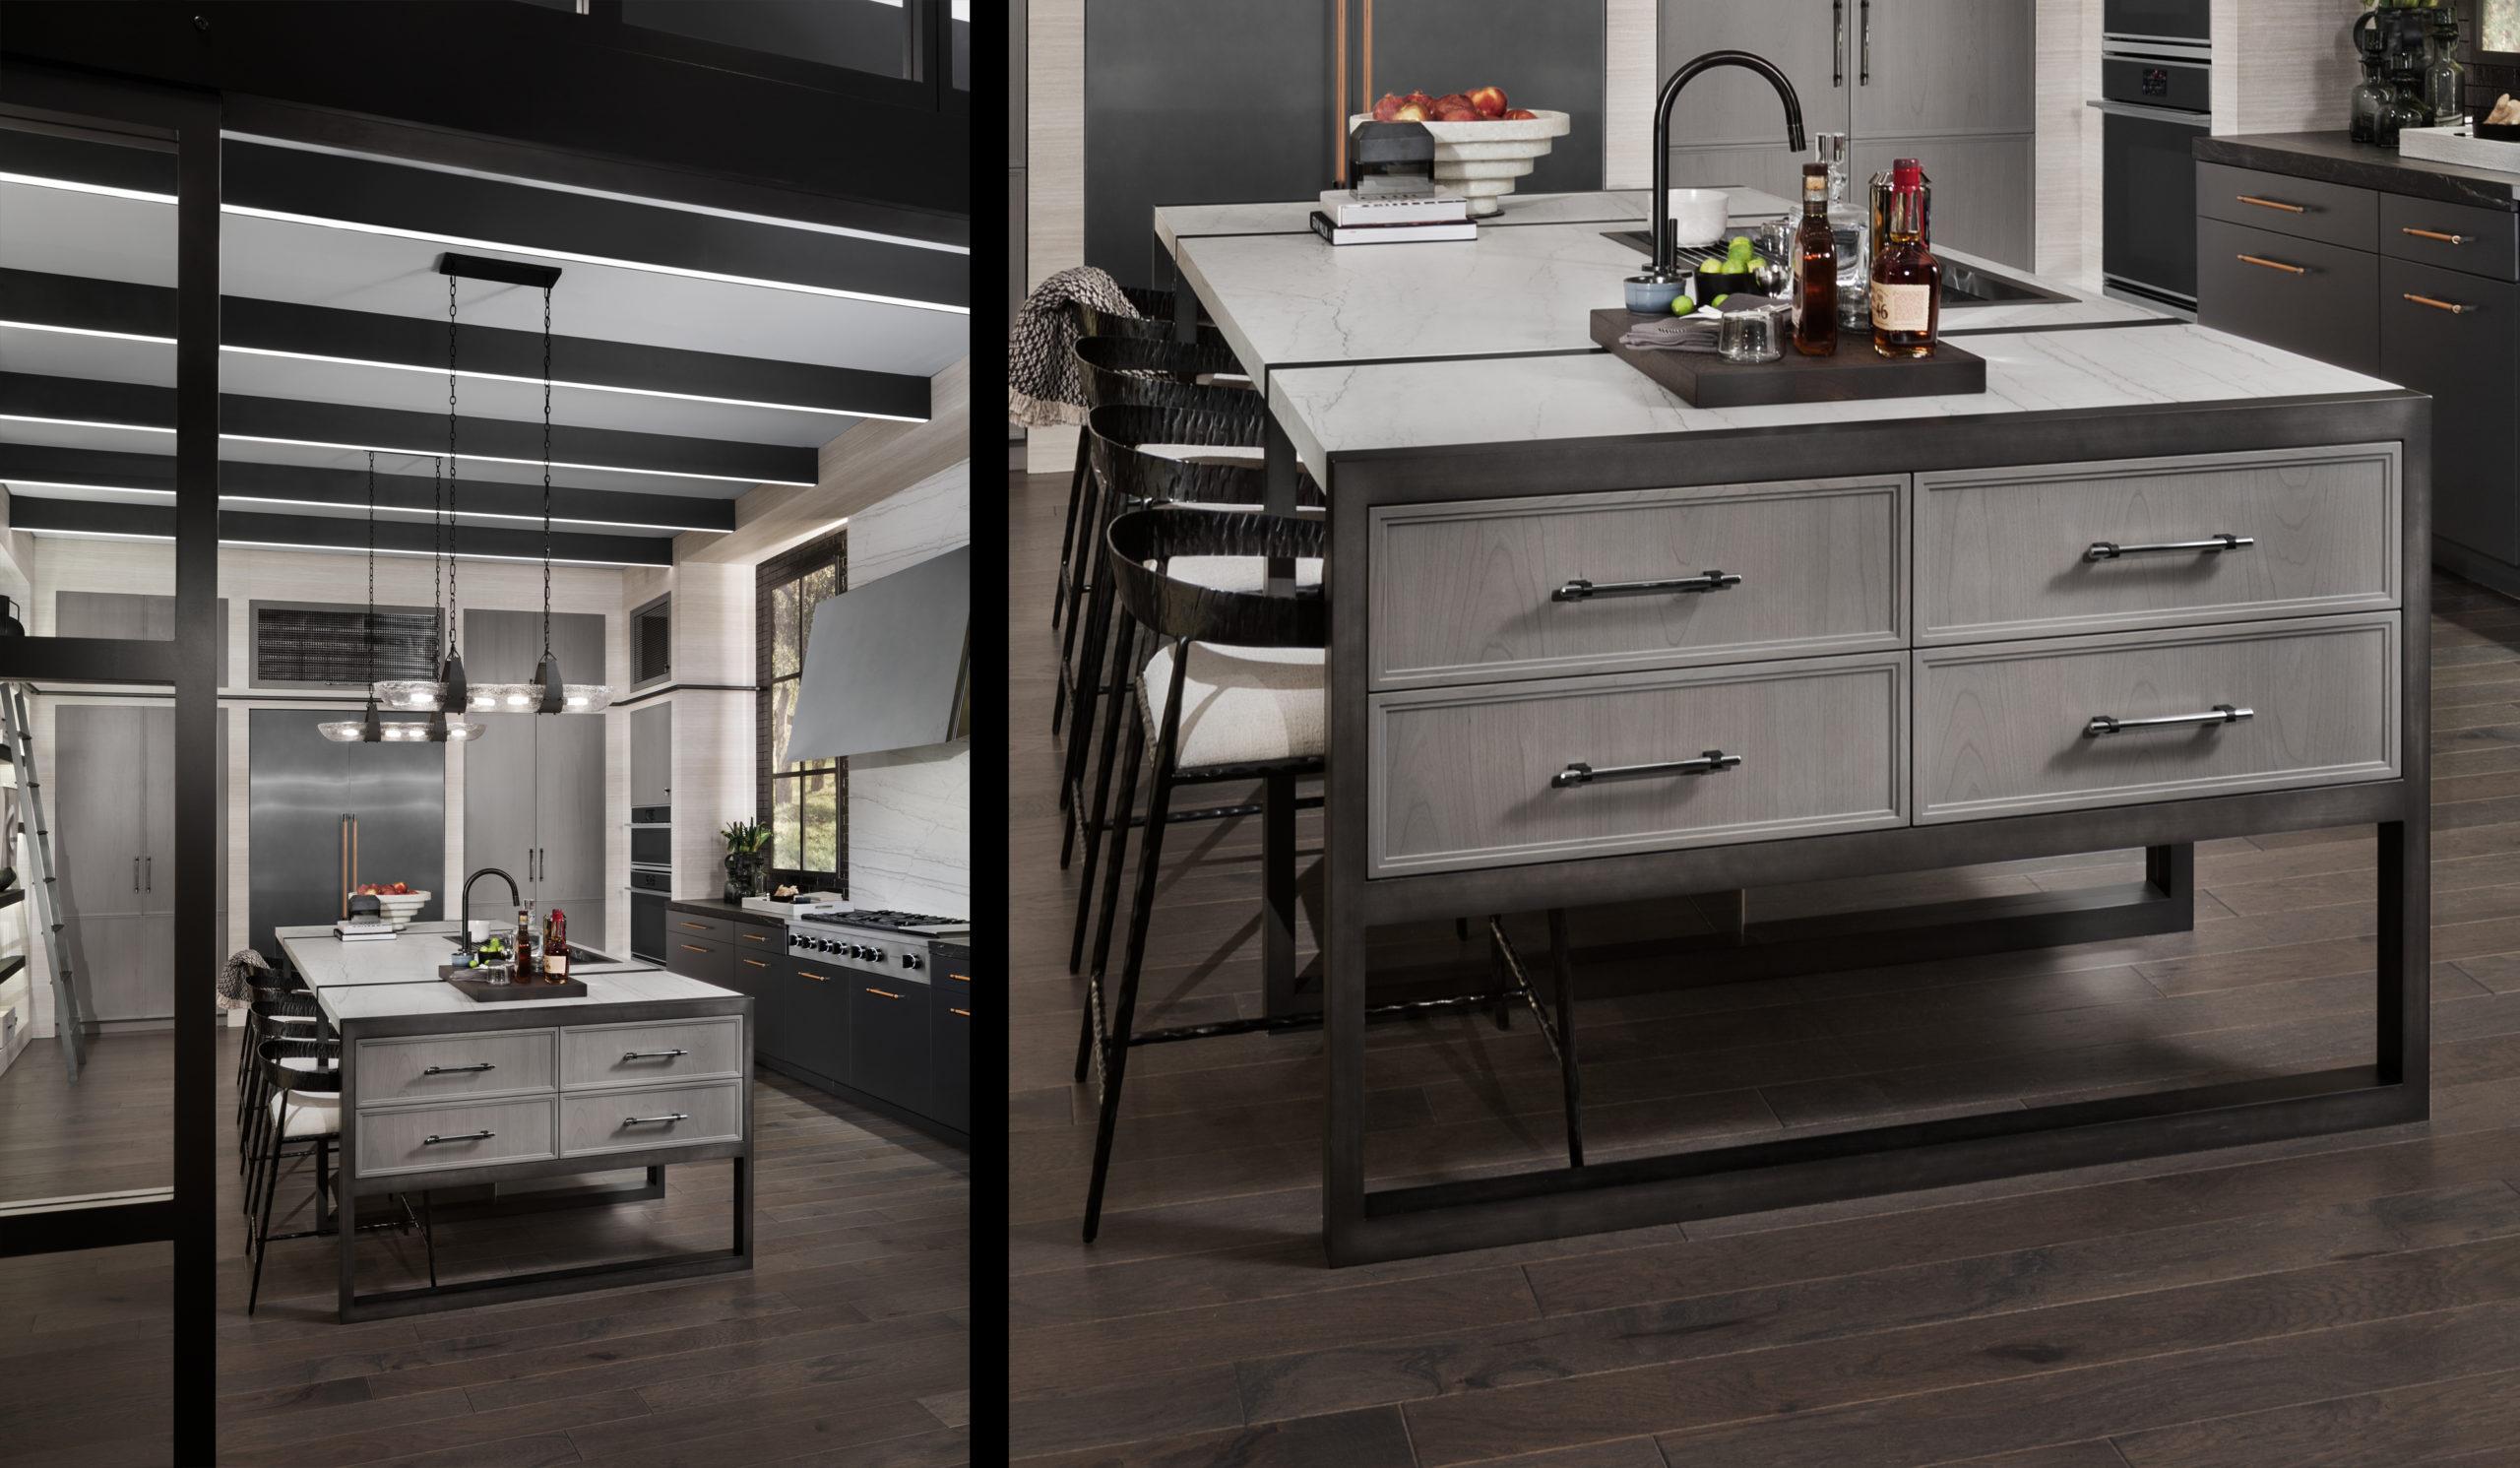 The “Giorgio” Bentwood cabinetry